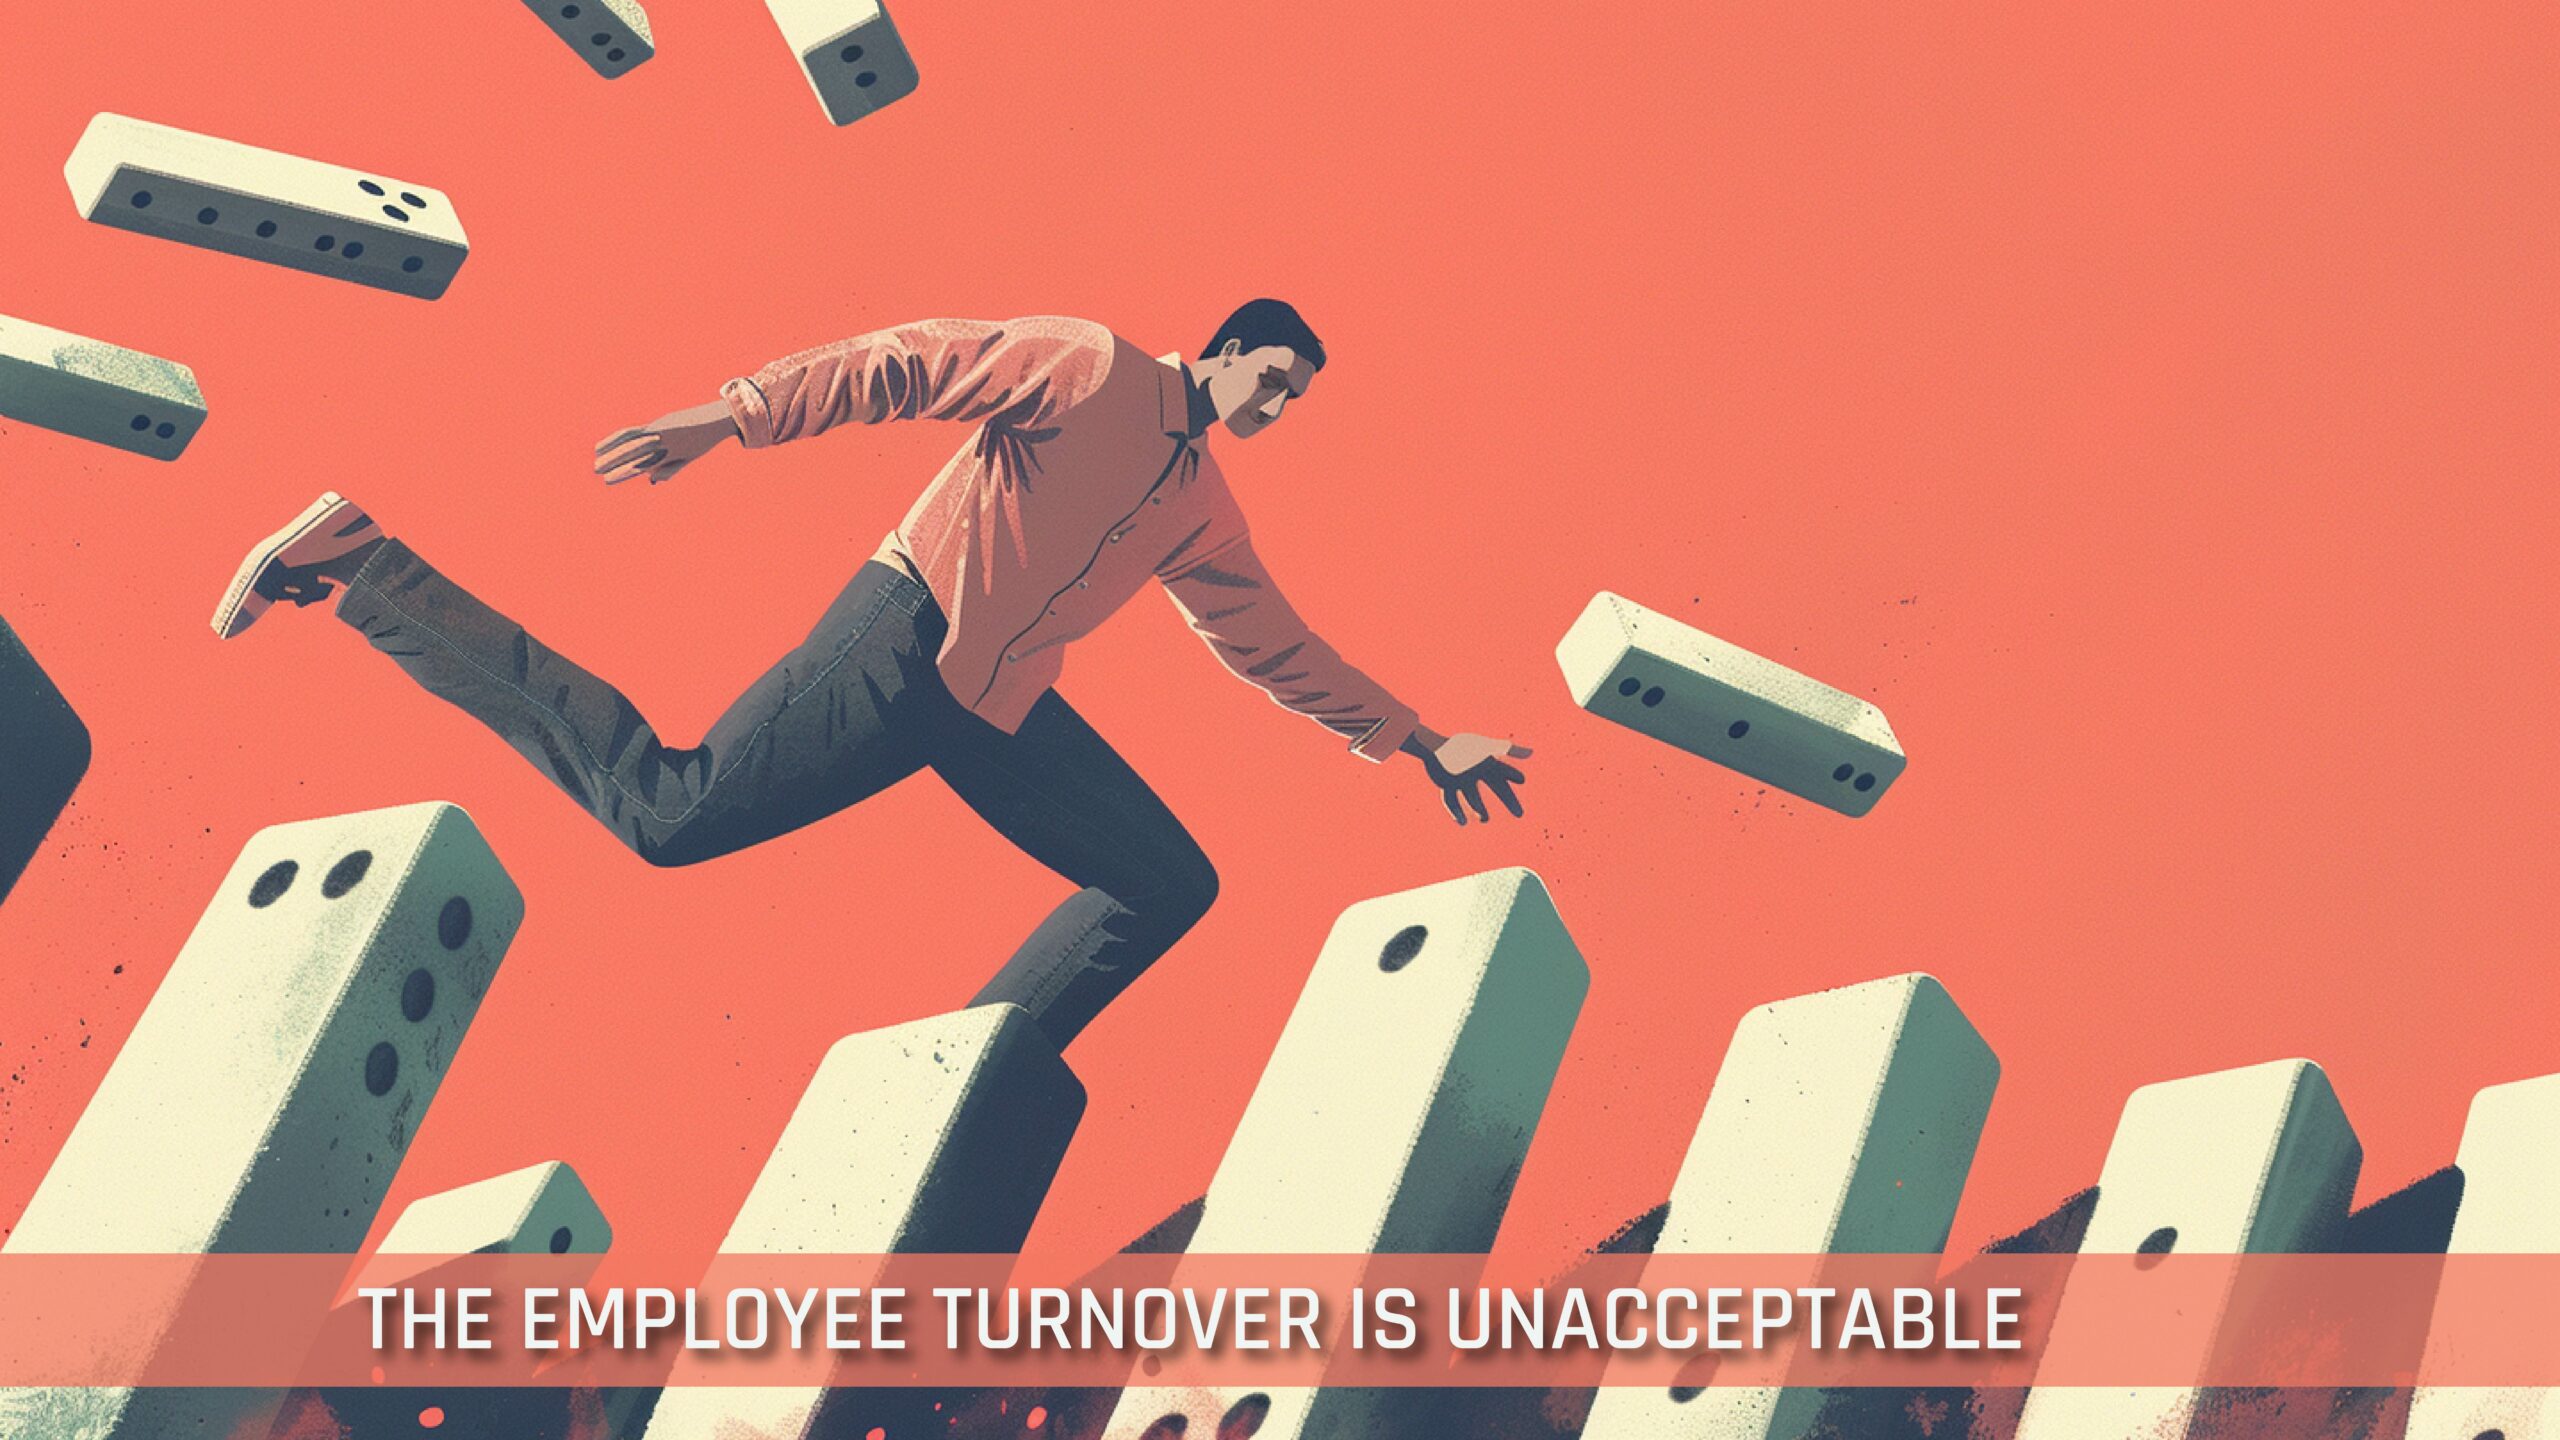 The Employee Turnover is Unacceptable